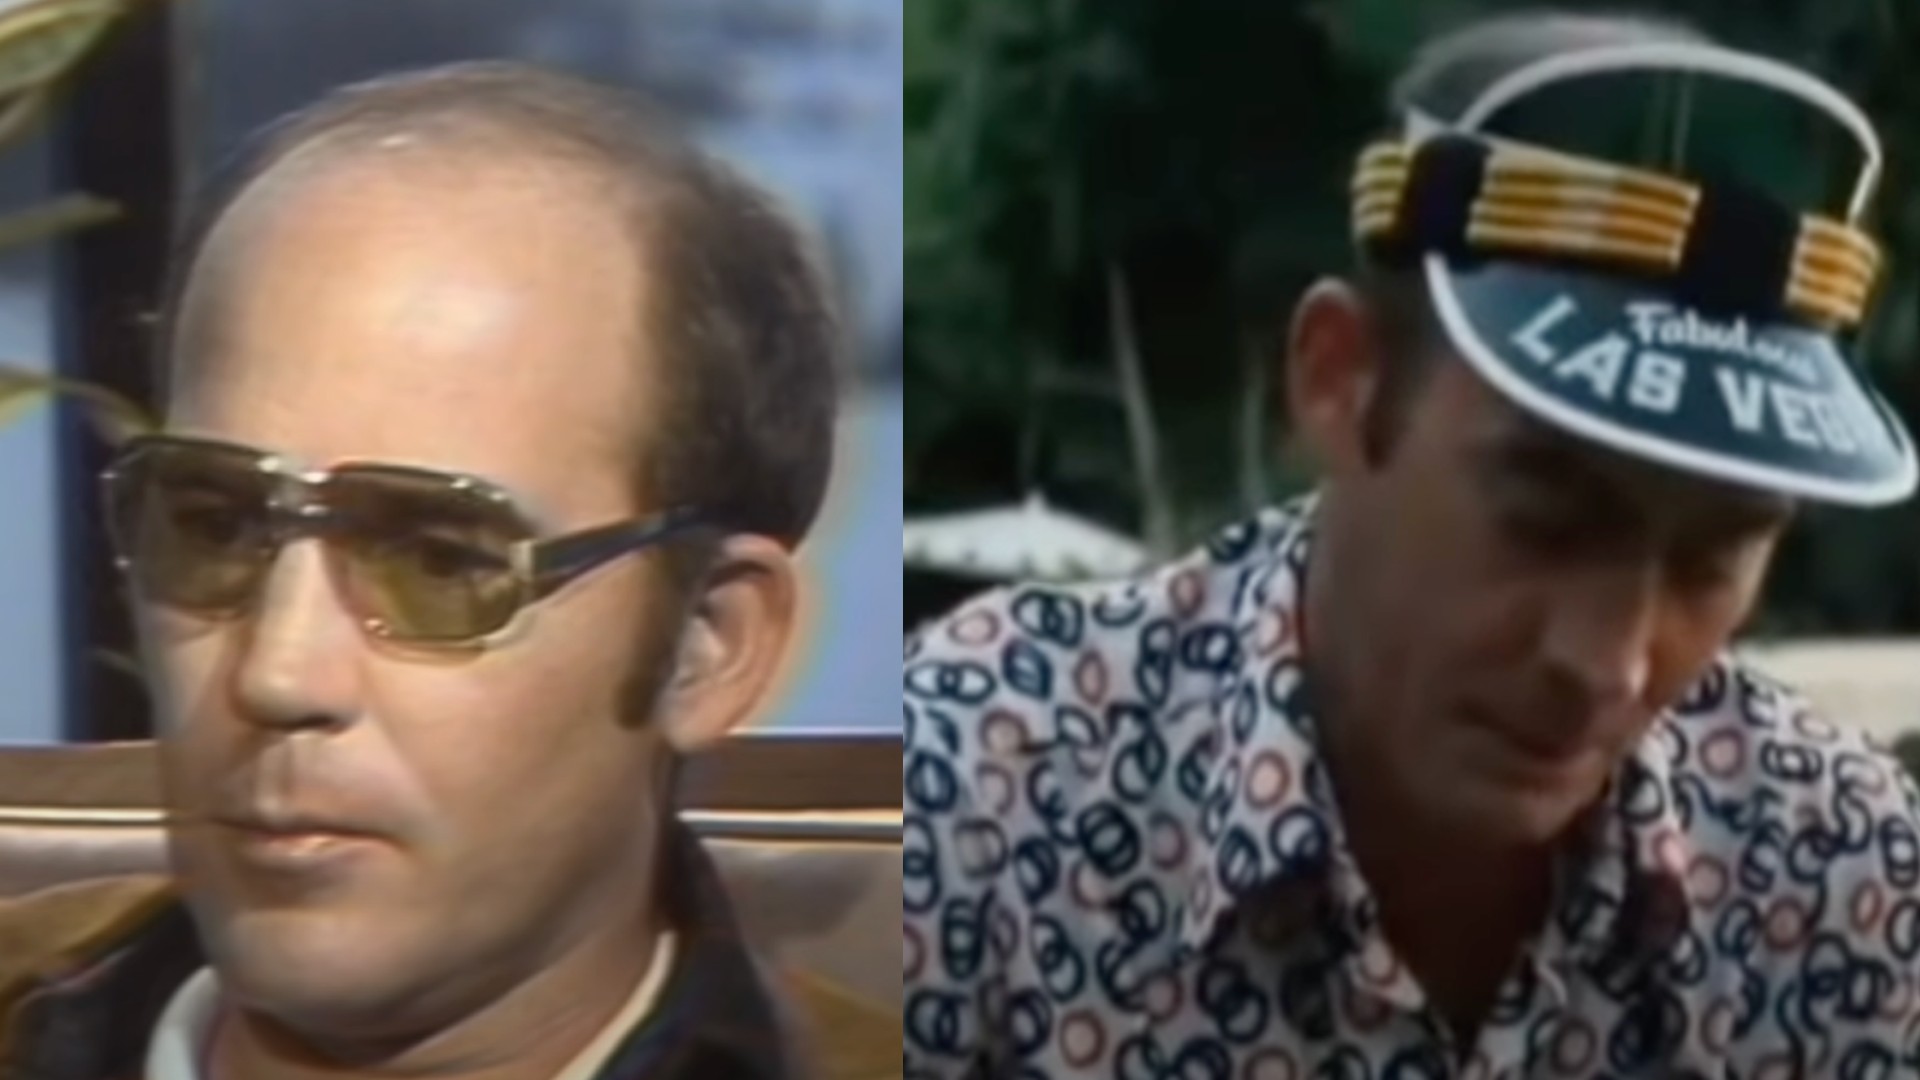 A collage showing different pictures of Hunter S. Thompson.